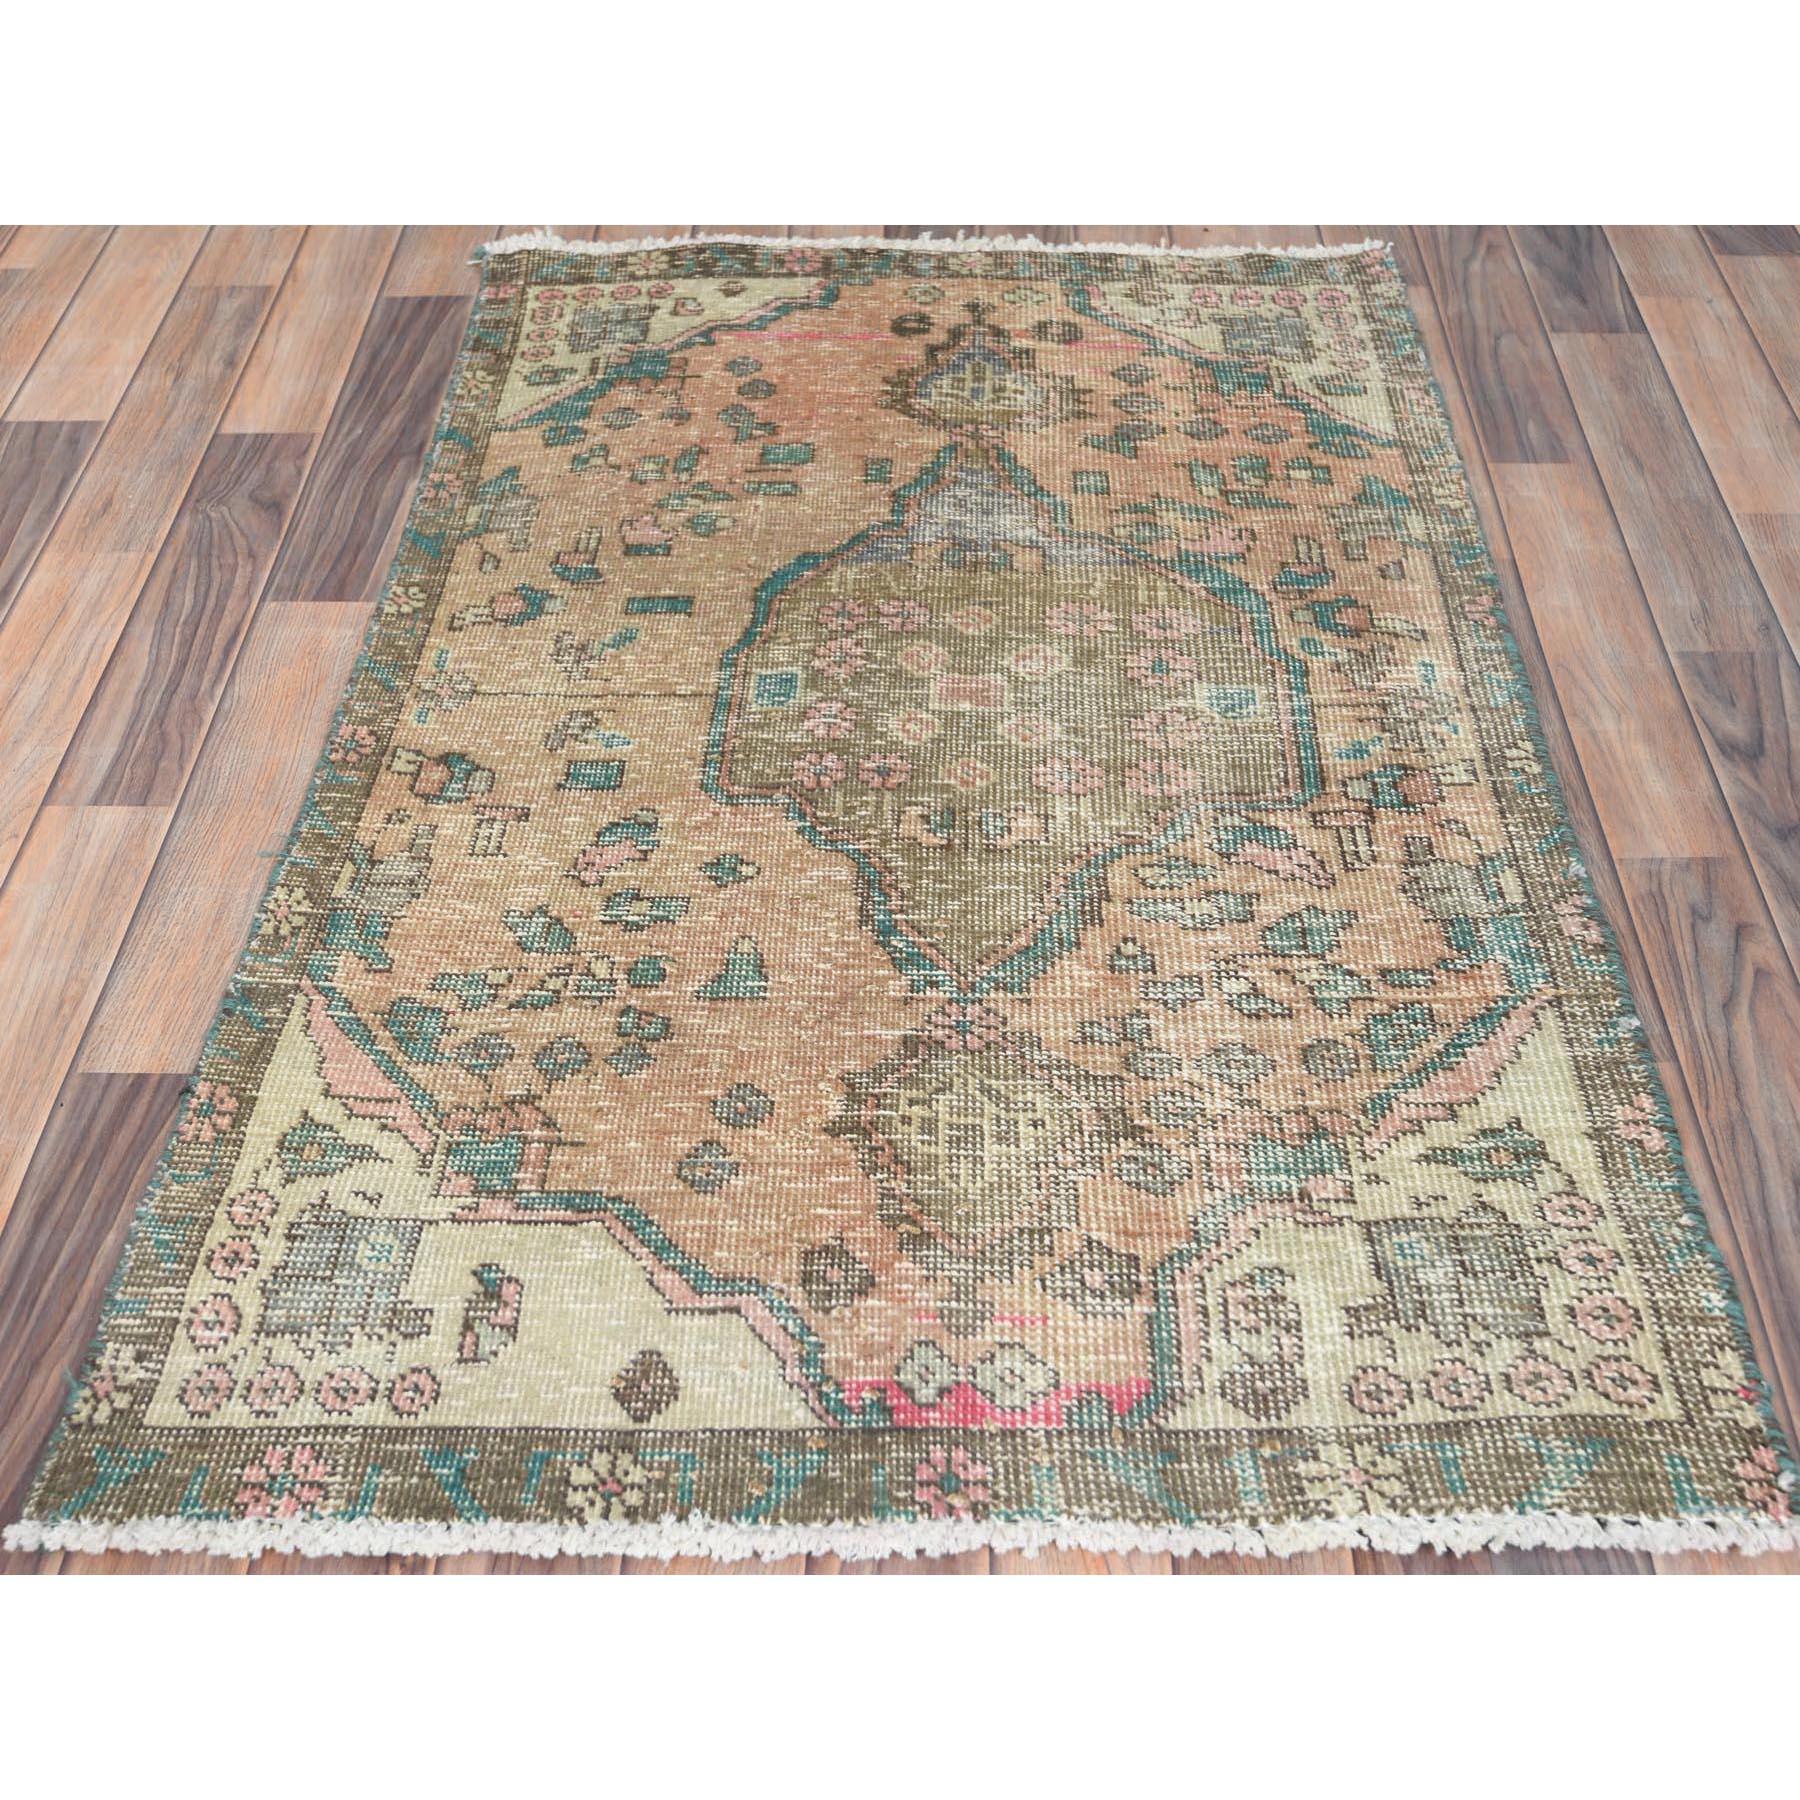 This fabulous Hand-Knotted carpet has been created and designed for extra strength and durability. This rug has been handcrafted for weeks in the traditional method that is used to make
Exact Rug Size in Feet and Inches : 3'0